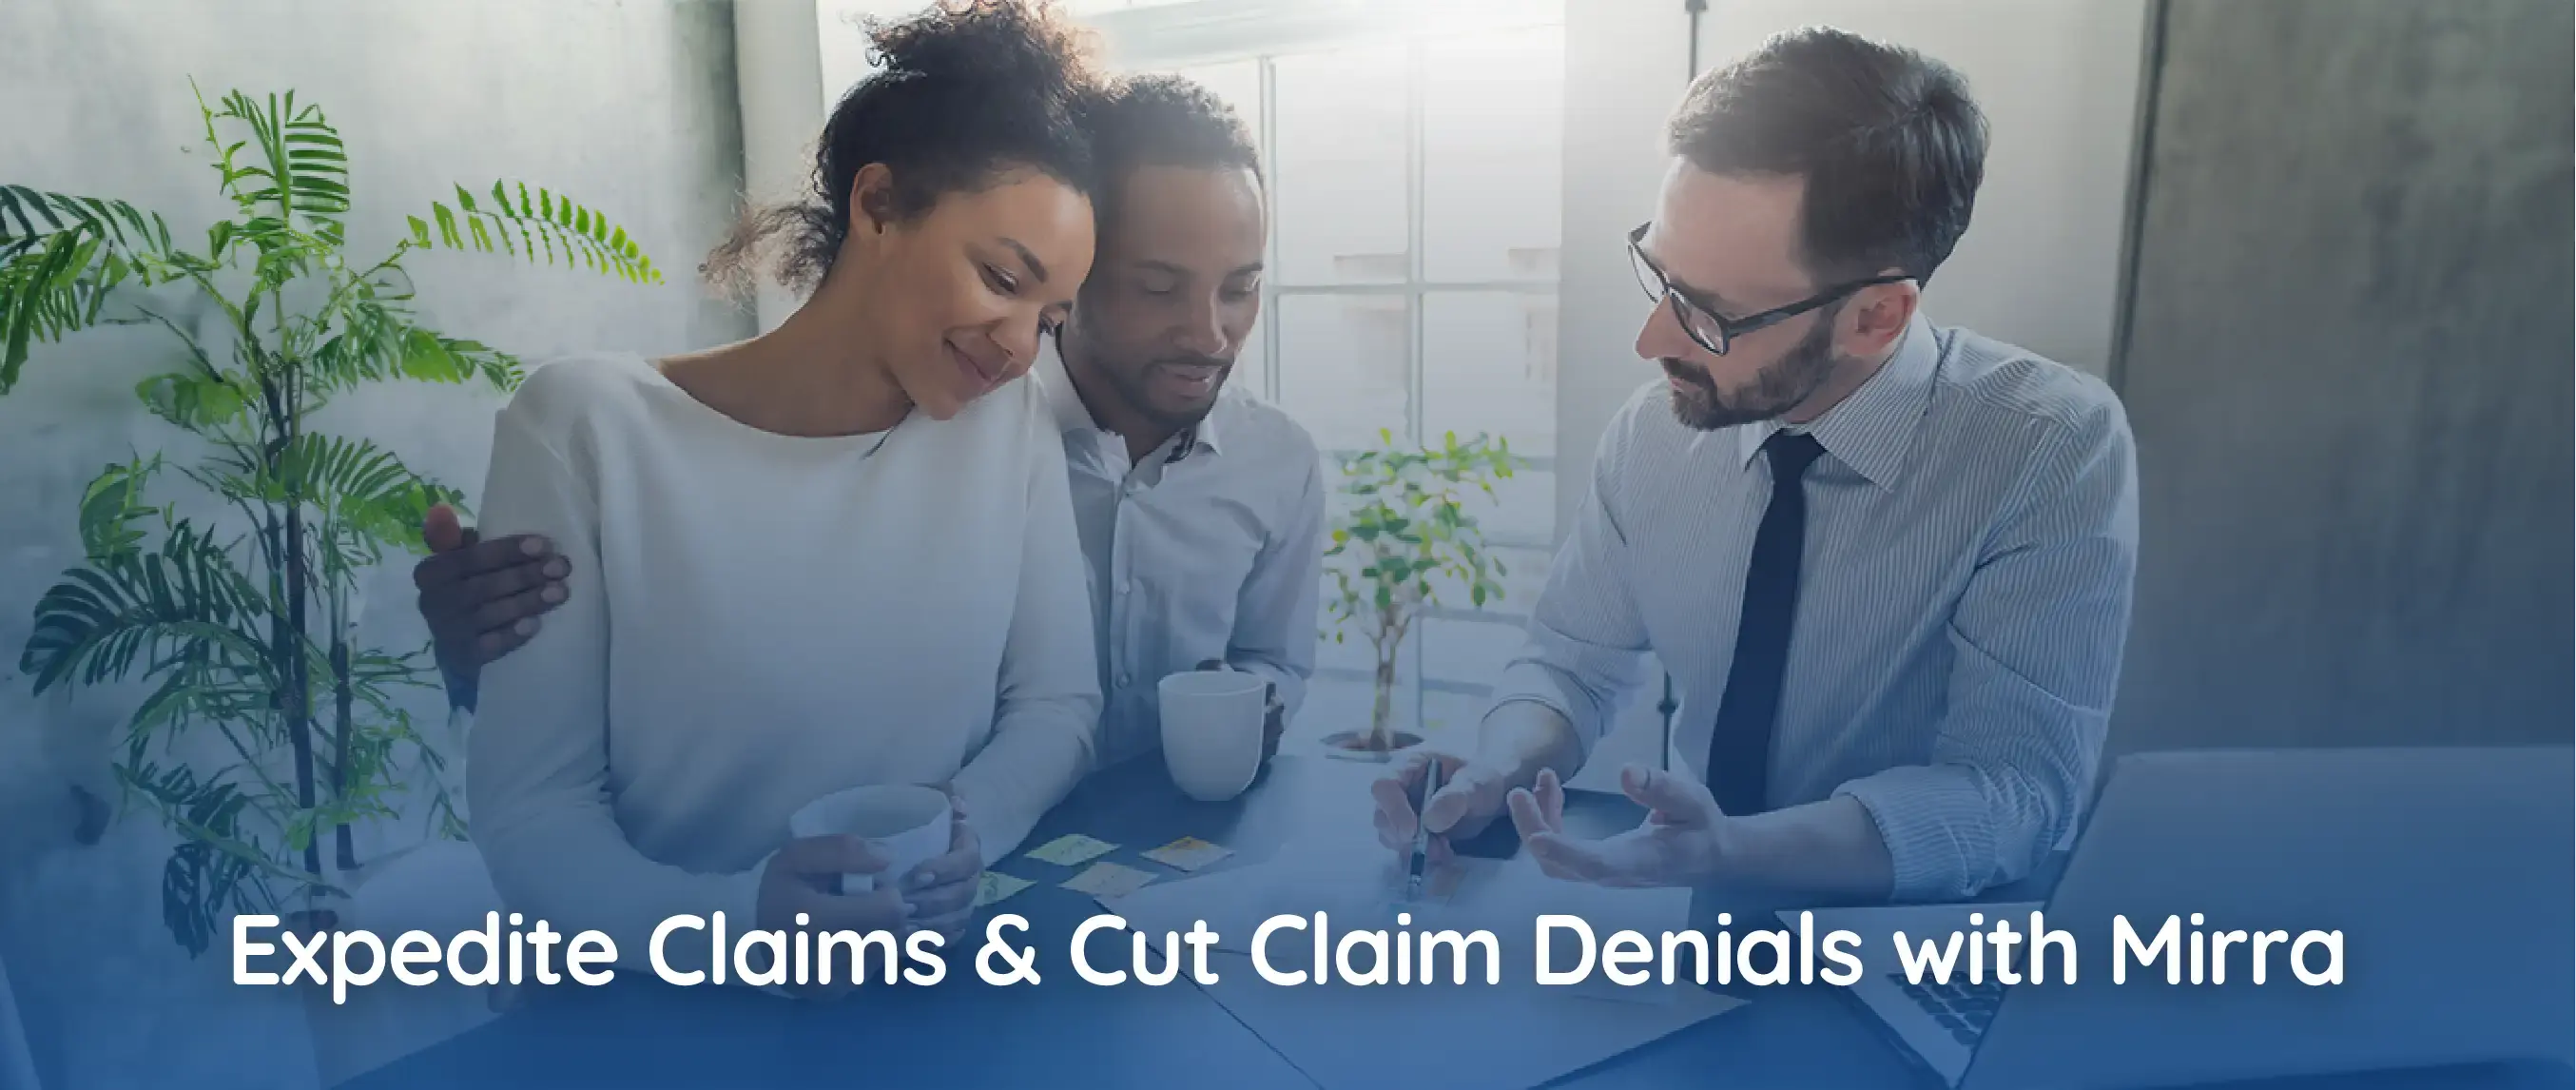 Expedite Claims and Cut Claim Denials with Mirra